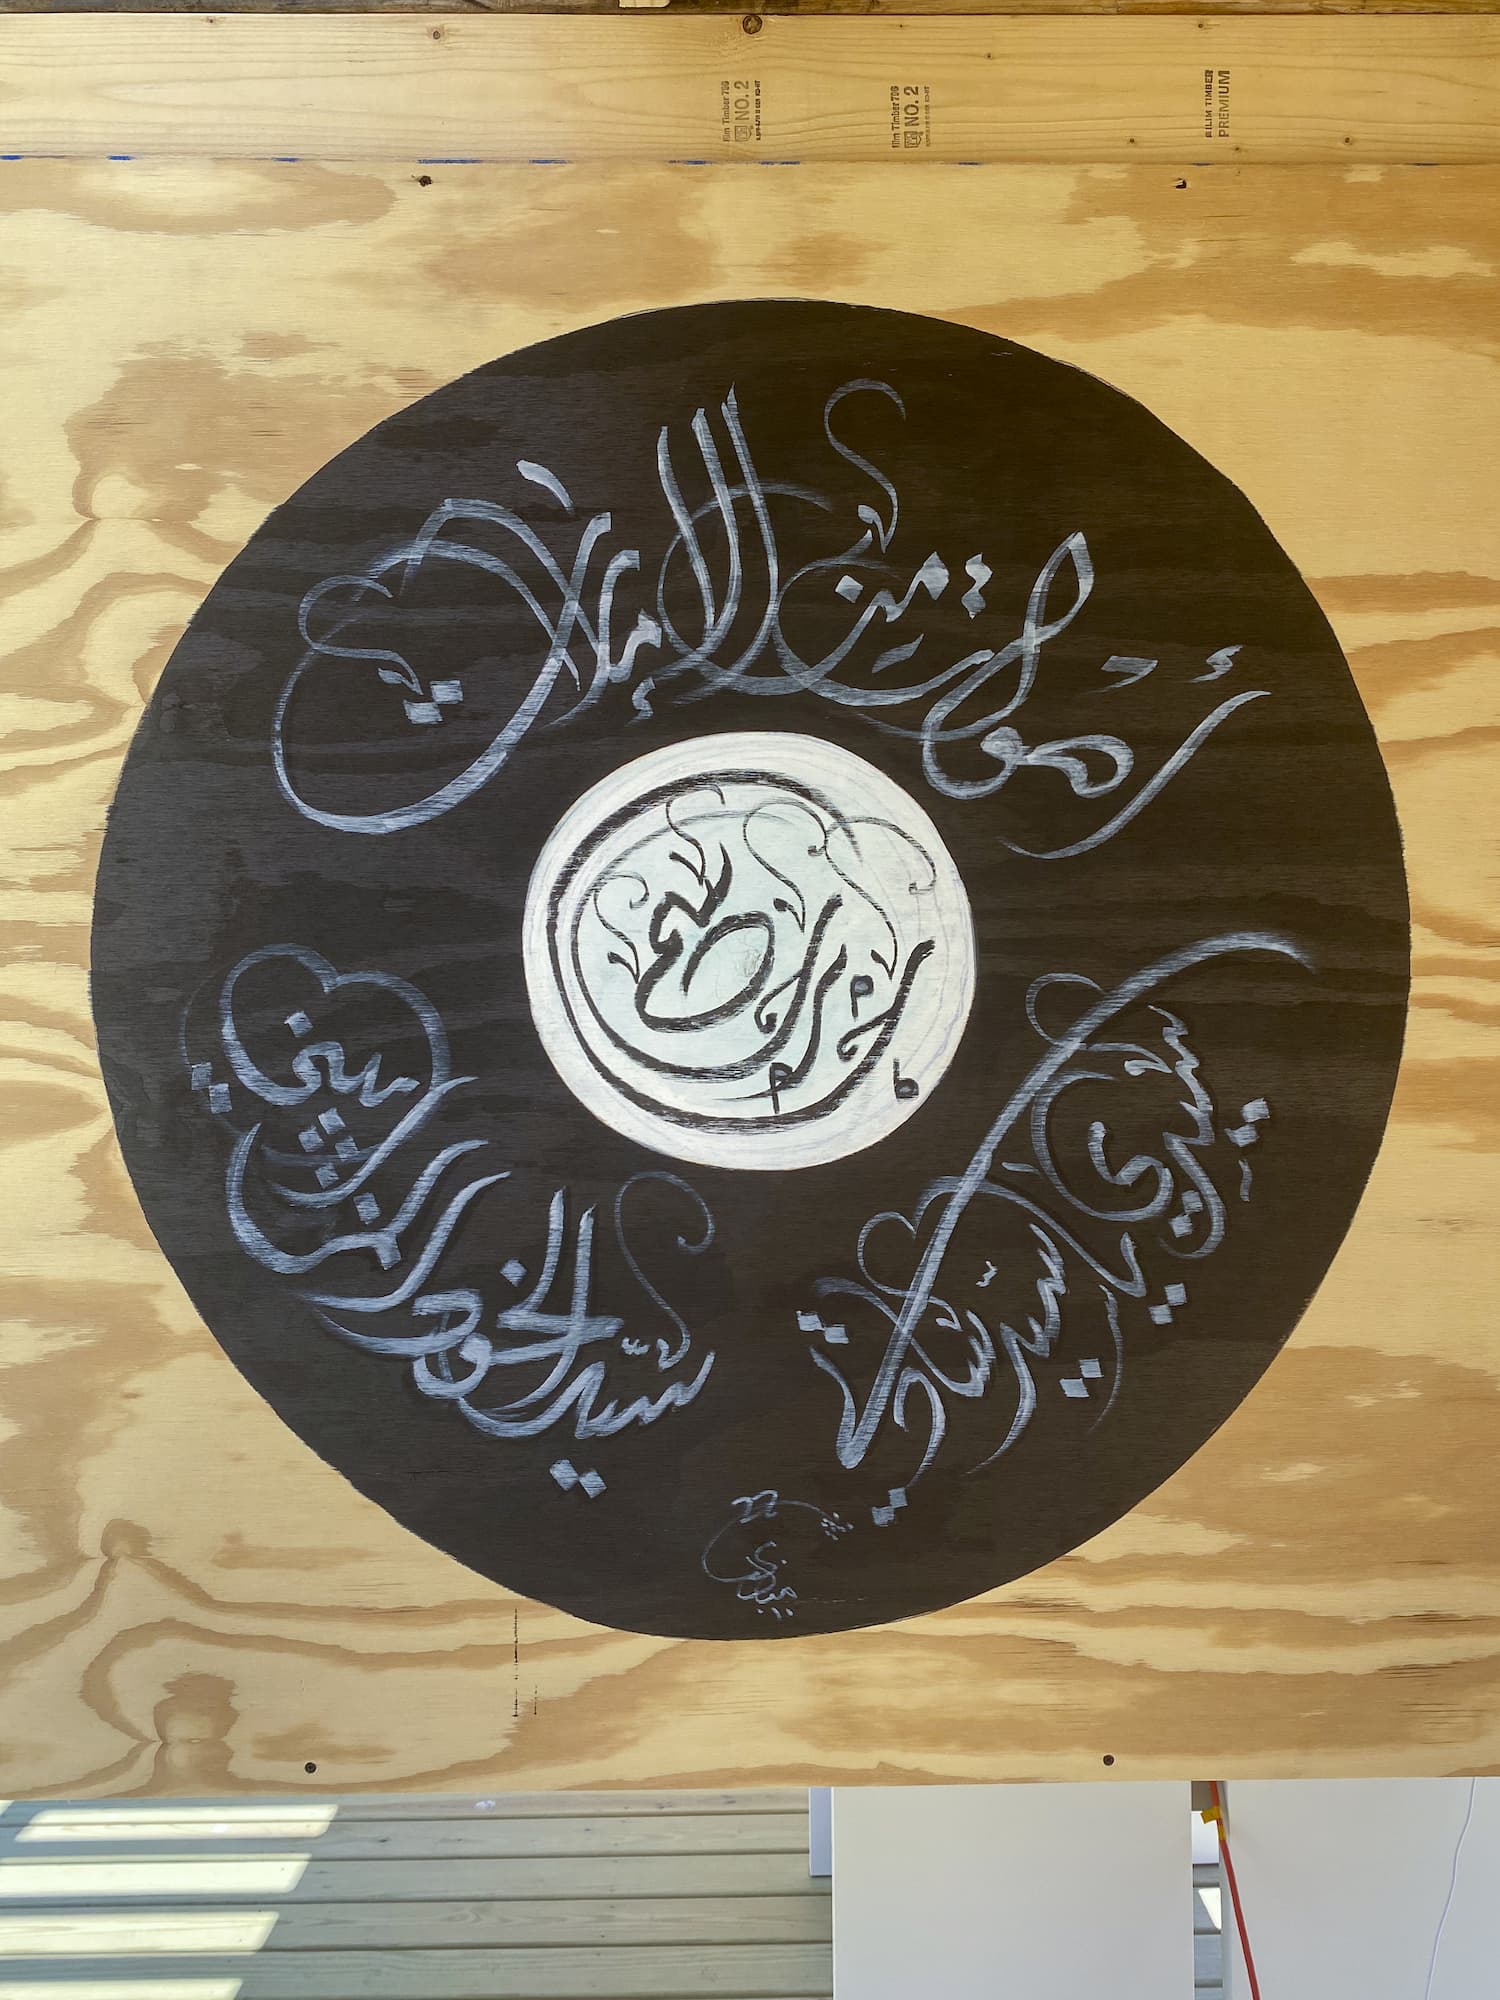 Round piece of artwork hanging on the wall with Arabic script